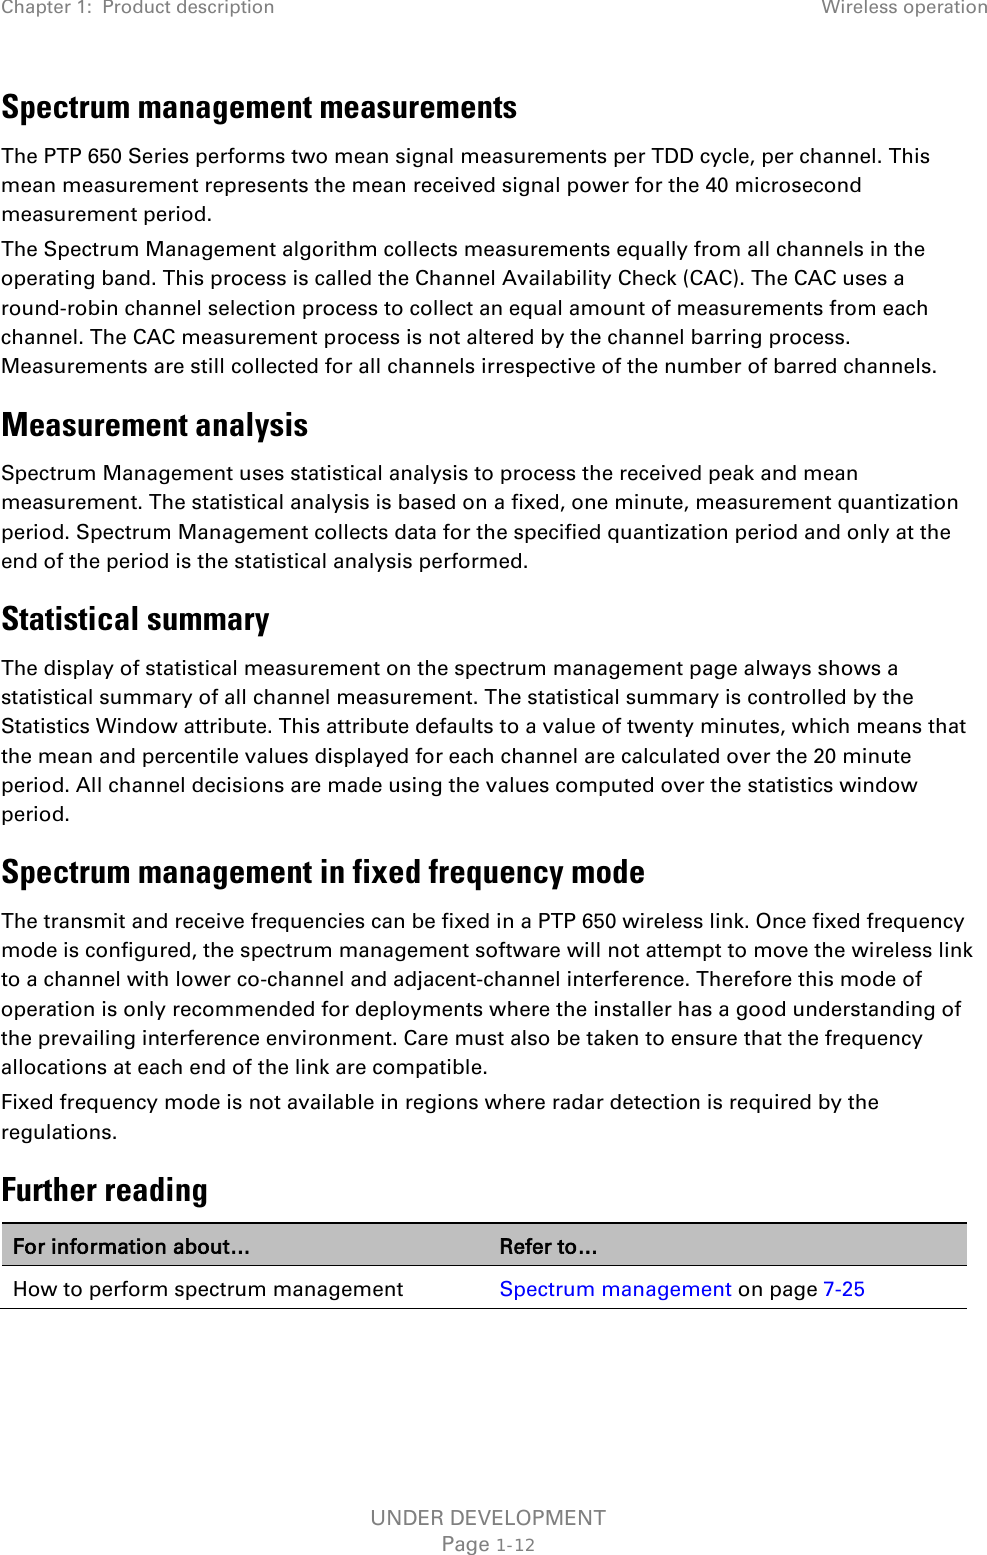 Chapter 1:  Product description Wireless operation  Spectrum management measurements The PTP 650 Series performs two mean signal measurements per TDD cycle, per channel. This mean measurement represents the mean received signal power for the 40 microsecond measurement period. The Spectrum Management algorithm collects measurements equally from all channels in the operating band. This process is called the Channel Availability Check (CAC). The CAC uses a round-robin channel selection process to collect an equal amount of measurements from each channel. The CAC measurement process is not altered by the channel barring process. Measurements are still collected for all channels irrespective of the number of barred channels. Measurement analysis Spectrum Management uses statistical analysis to process the received peak and mean measurement. The statistical analysis is based on a fixed, one minute, measurement quantization period. Spectrum Management collects data for the specified quantization period and only at the end of the period is the statistical analysis performed. Statistical summary The display of statistical measurement on the spectrum management page always shows a statistical summary of all channel measurement. The statistical summary is controlled by the Statistics Window attribute. This attribute defaults to a value of twenty minutes, which means that the mean and percentile values displayed for each channel are calculated over the 20 minute period. All channel decisions are made using the values computed over the statistics window period. Spectrum management in fixed frequency mode The transmit and receive frequencies can be fixed in a PTP 650 wireless link. Once fixed frequency mode is configured, the spectrum management software will not attempt to move the wireless link to a channel with lower co-channel and adjacent-channel interference. Therefore this mode of operation is only recommended for deployments where the installer has a good understanding of the prevailing interference environment. Care must also be taken to ensure that the frequency allocations at each end of the link are compatible.  Fixed frequency mode is not available in regions where radar detection is required by the regulations.  Further reading For information about… Refer to… How to perform spectrum management Spectrum management on page 7-25   UNDER DEVELOPMENT Page 1-12 